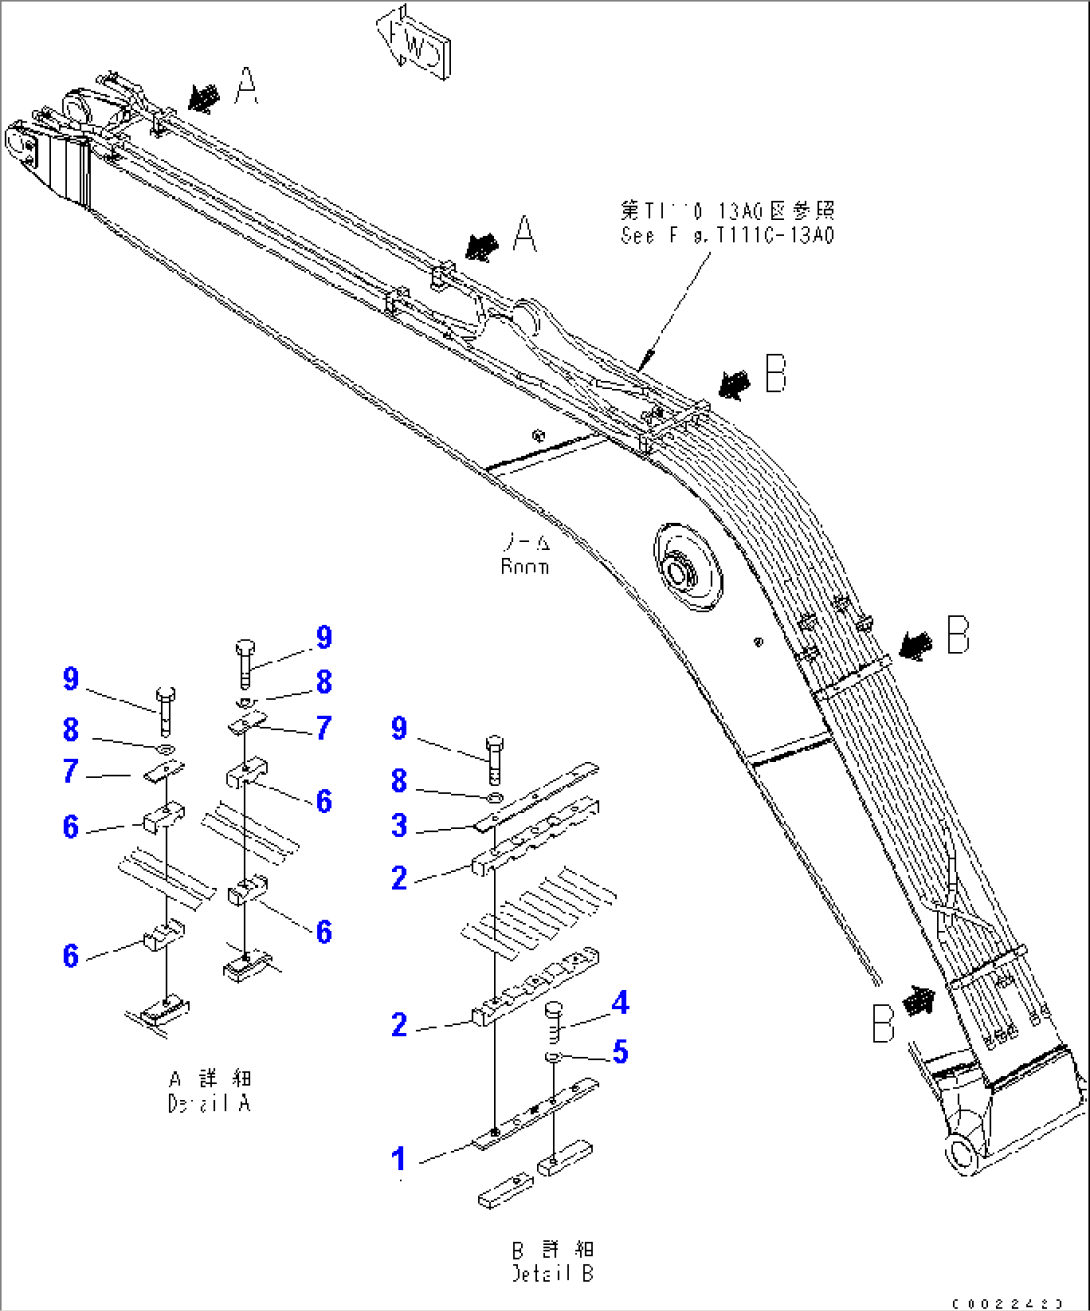 1-PIECE BOOM (ADDITIONAL PIPING) (CLAMP)